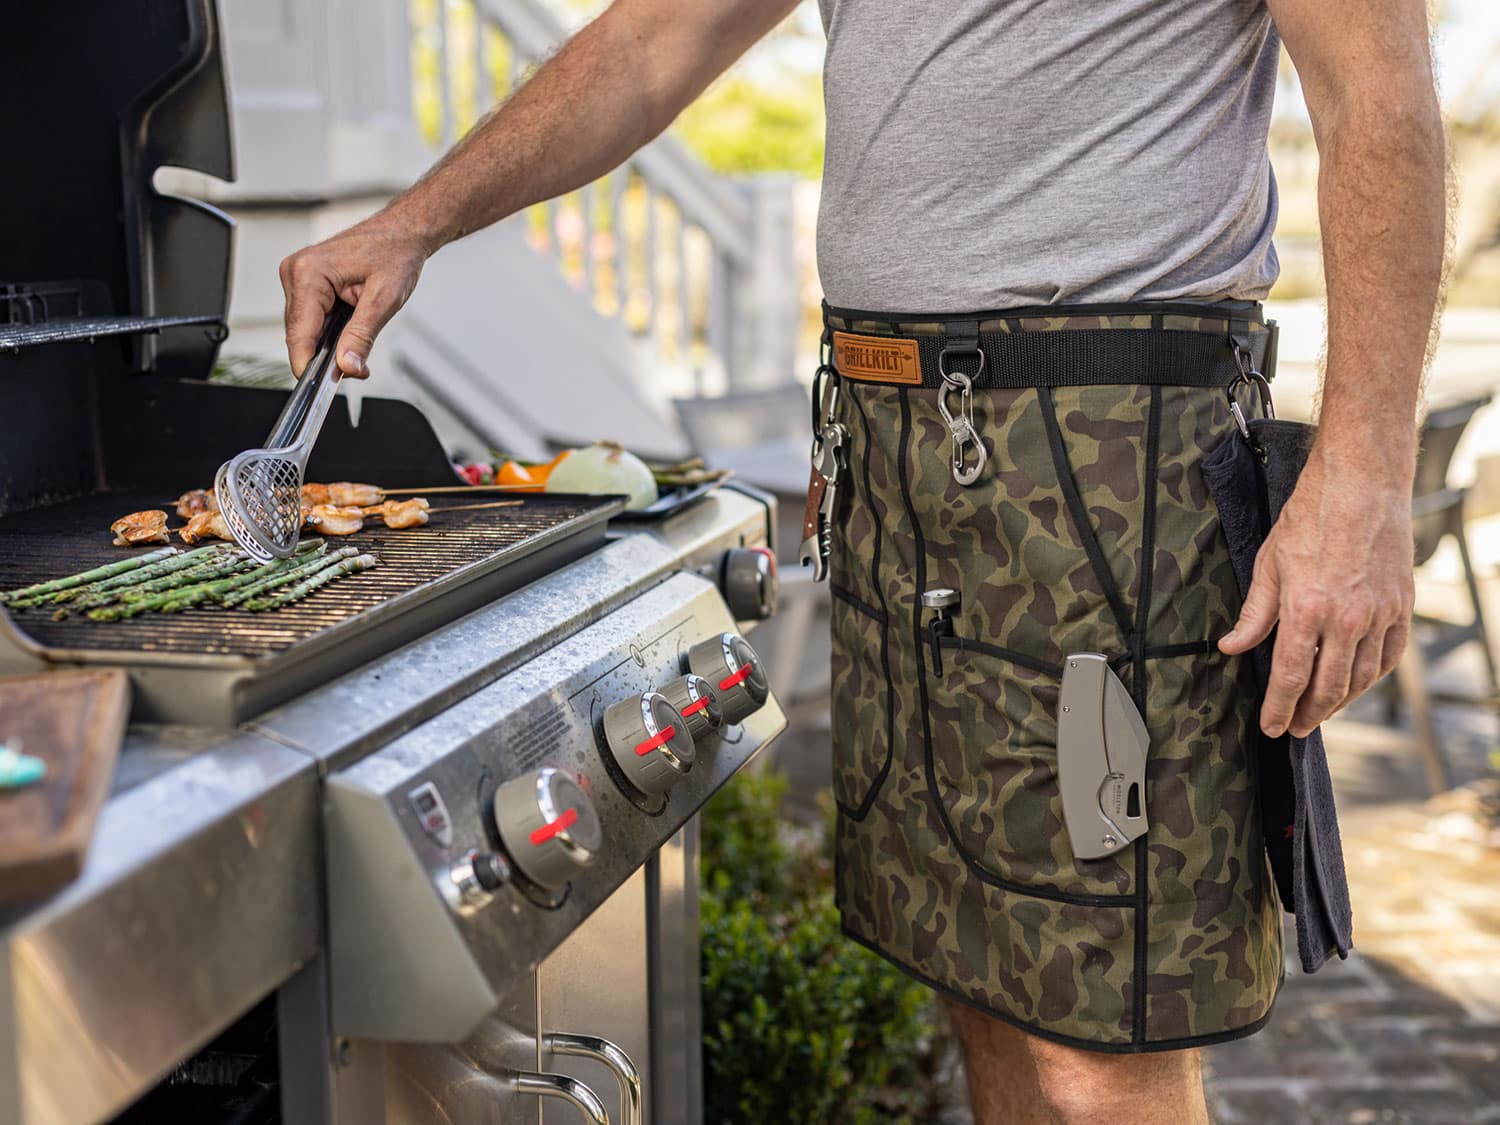 A man wearing the GrillKilt apron while grilling.